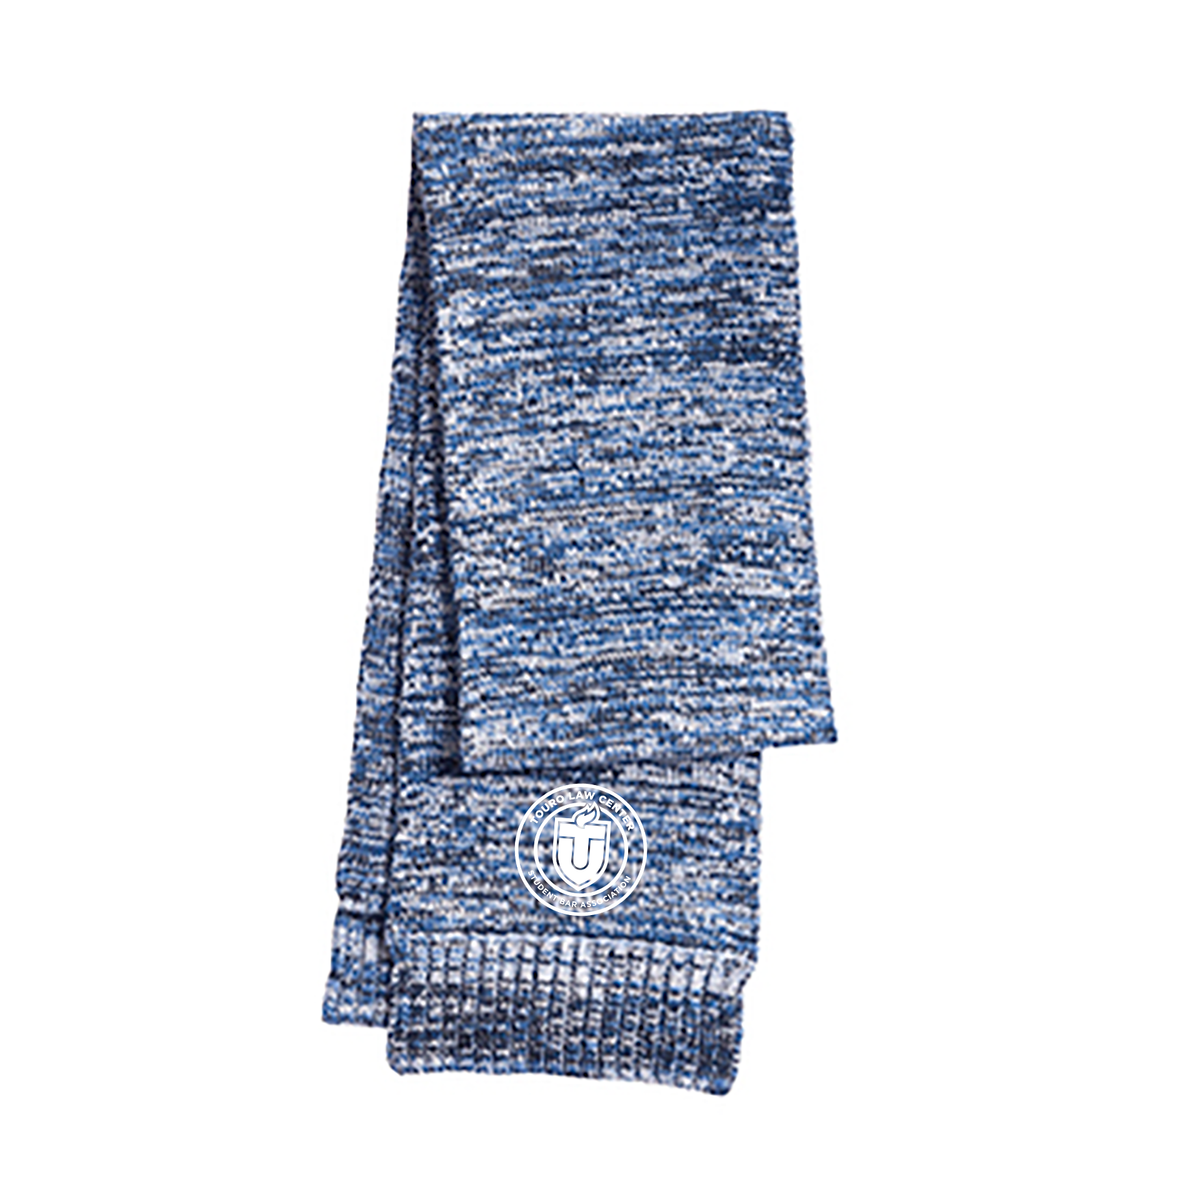 Touro Law Center Student Bar Association Marled Scarf